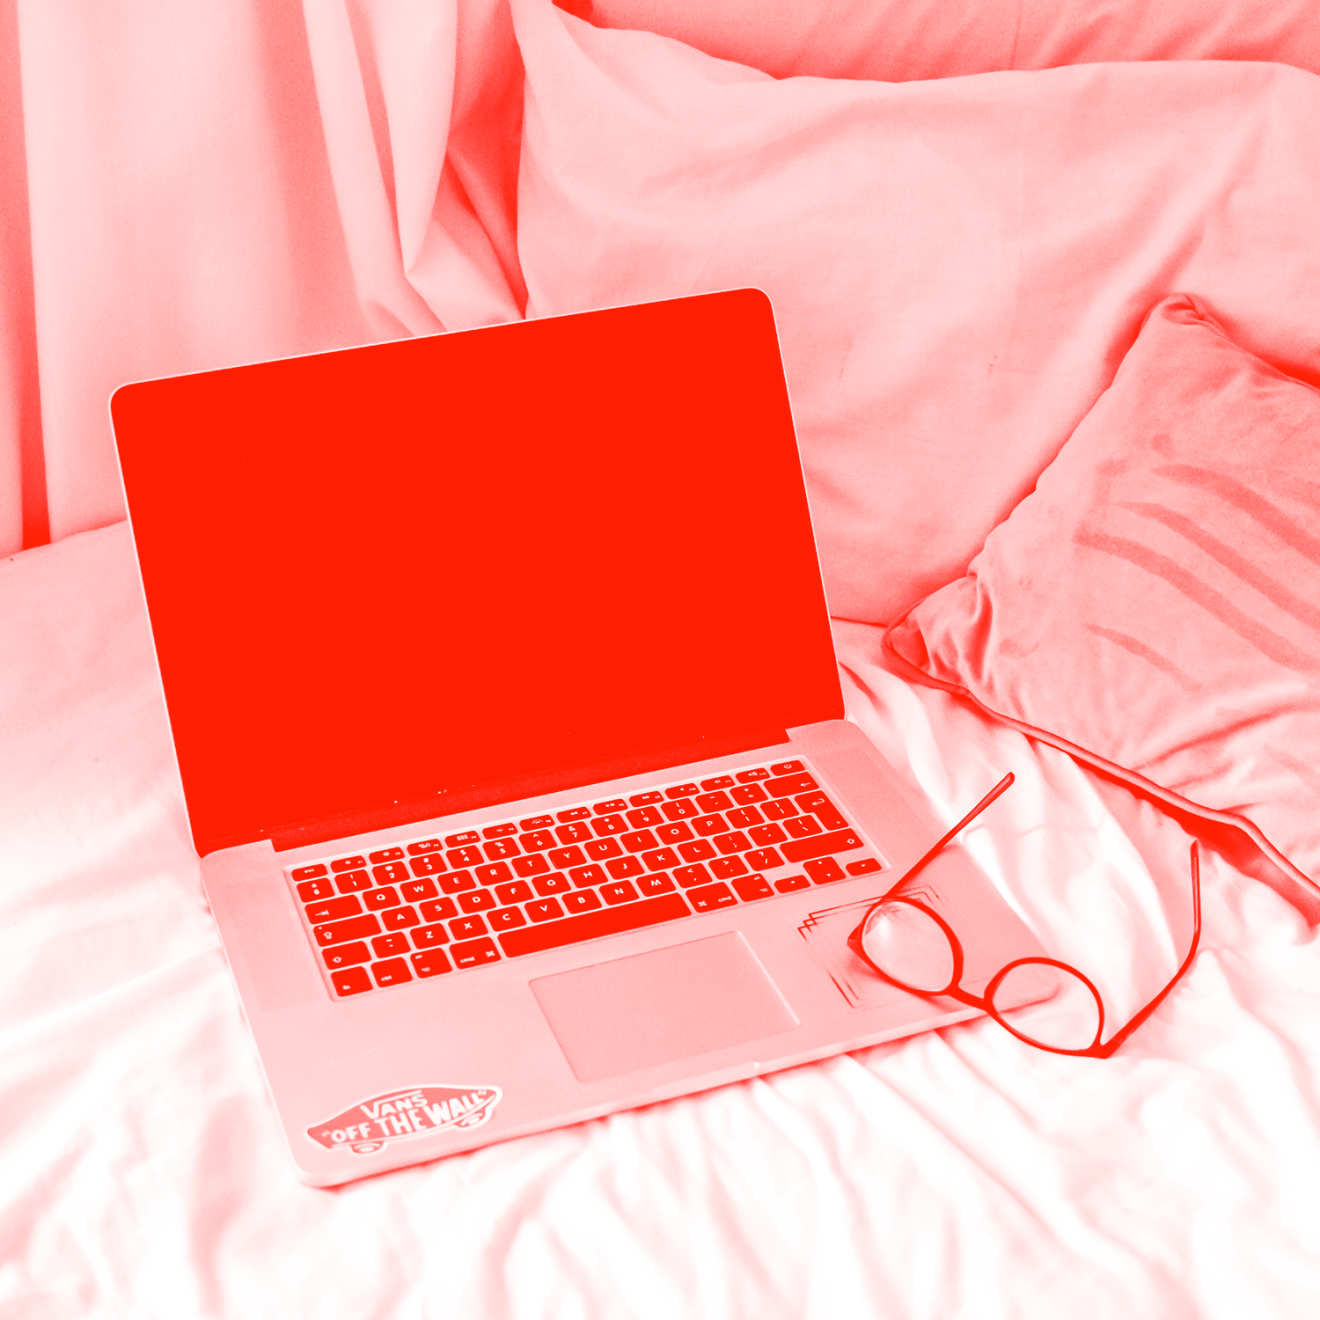 Laptop and glasses on a bed.